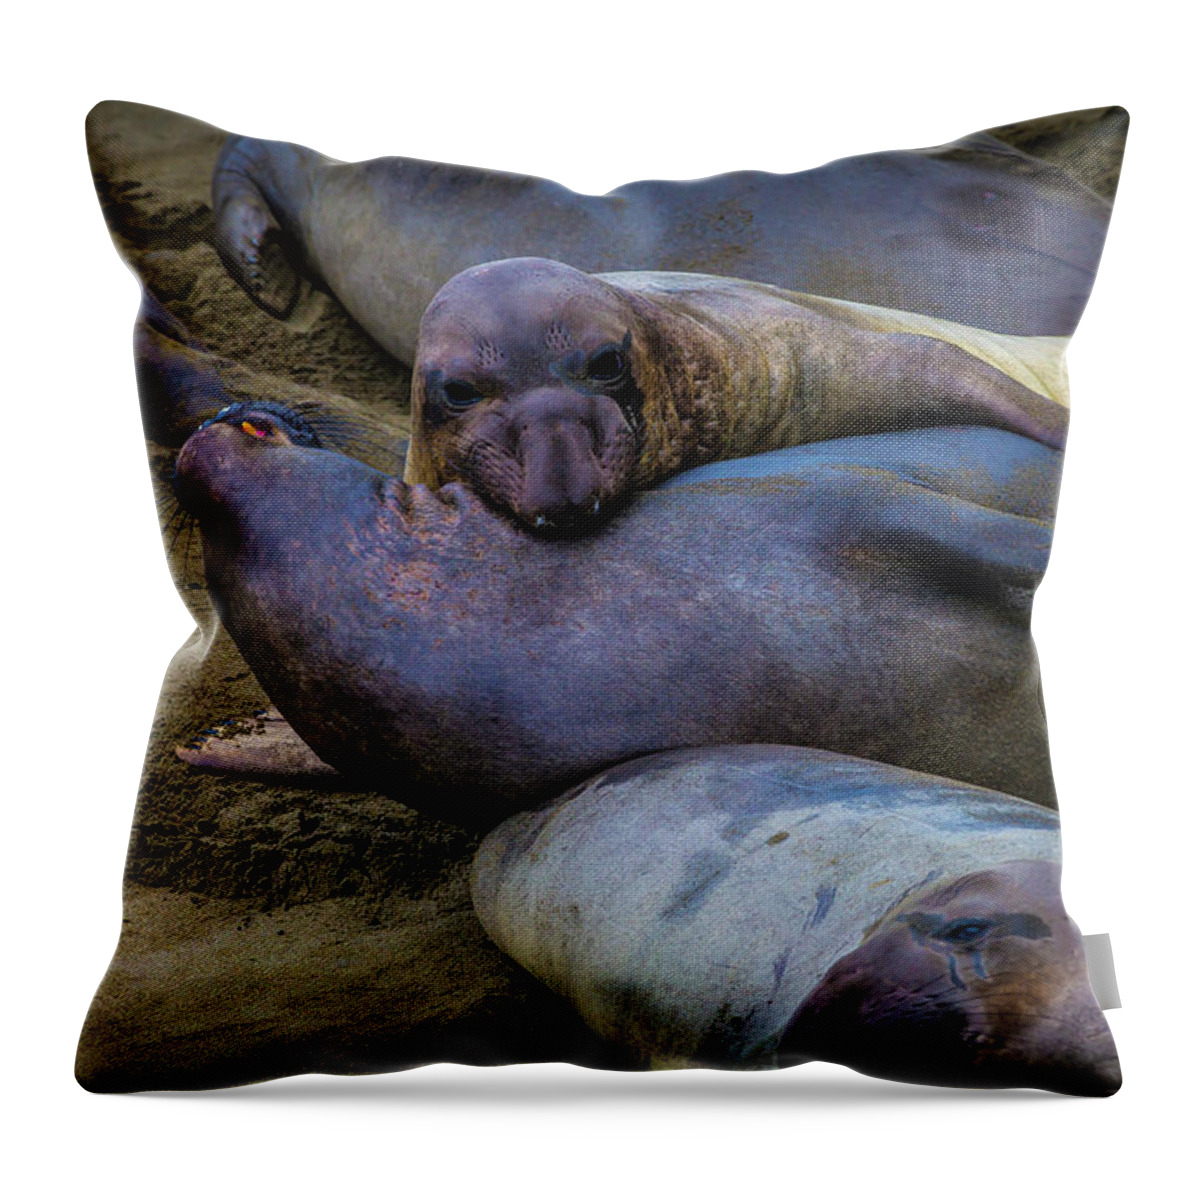 Elephant Throw Pillow featuring the photograph Elephant Seals Fighting by Garry Gay